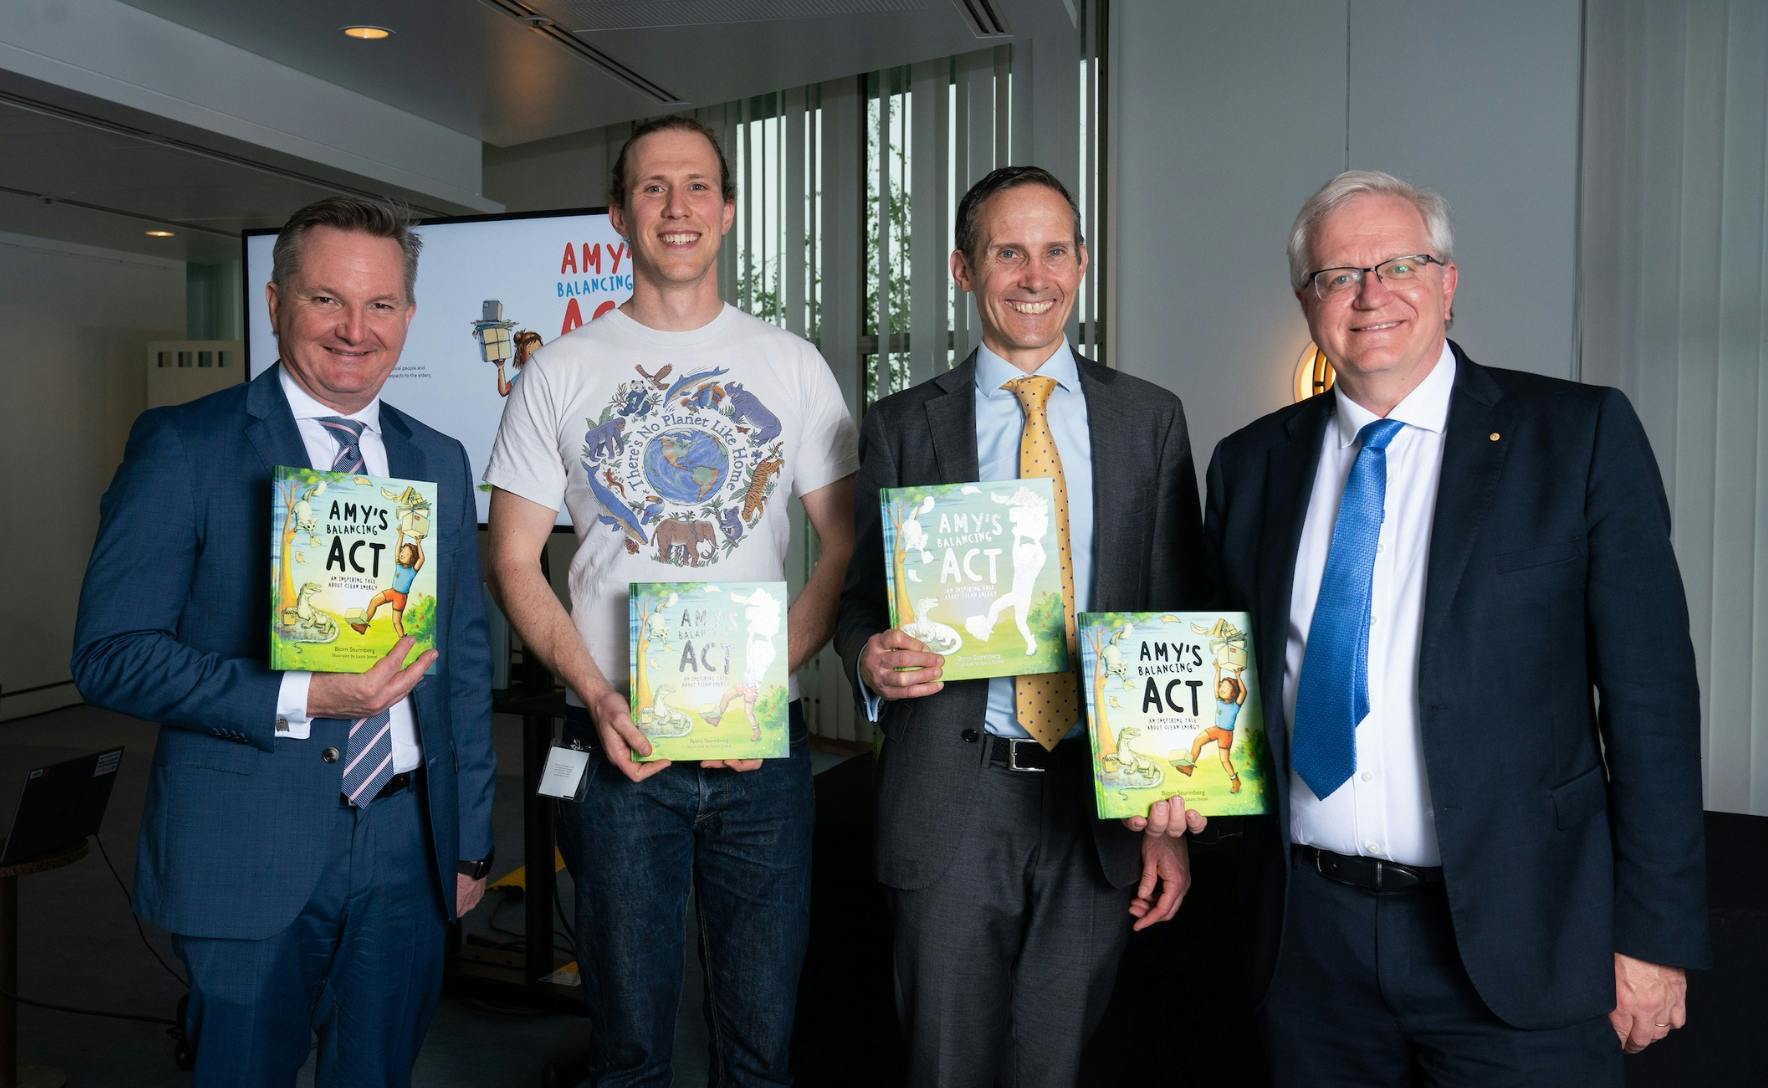 Four men standing in a row and smiling while holding the book Amy's balancing act